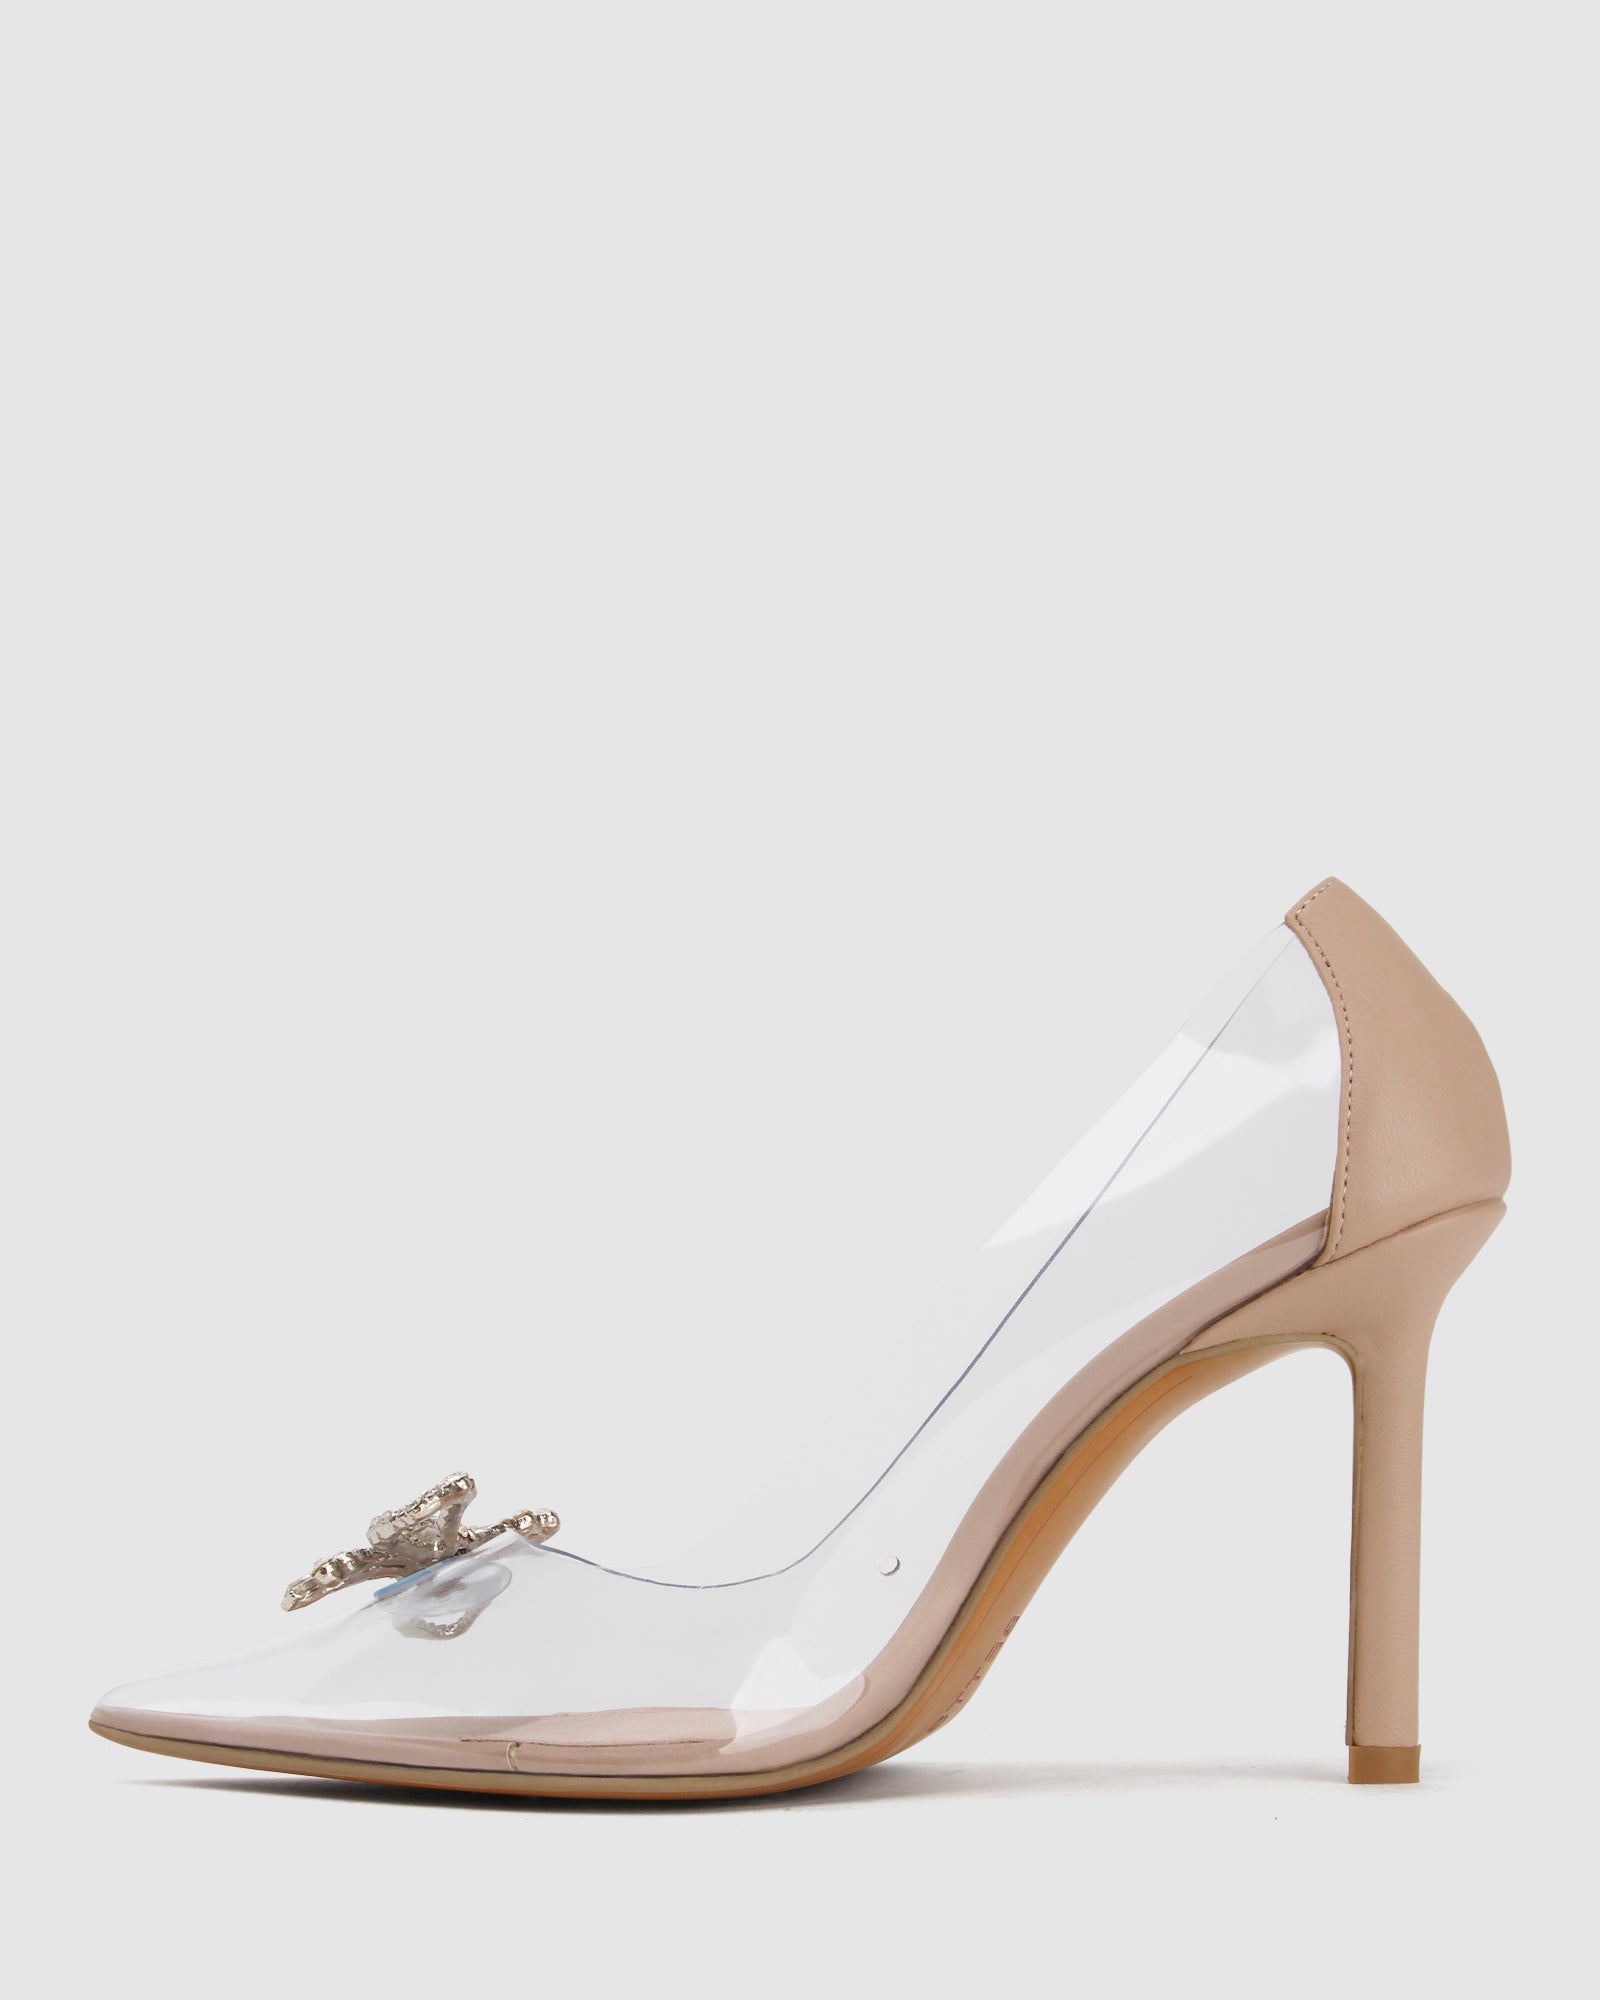 Hobbs Adrienne Suede Court Shoes, Pale Yellow at John Lewis & Partners